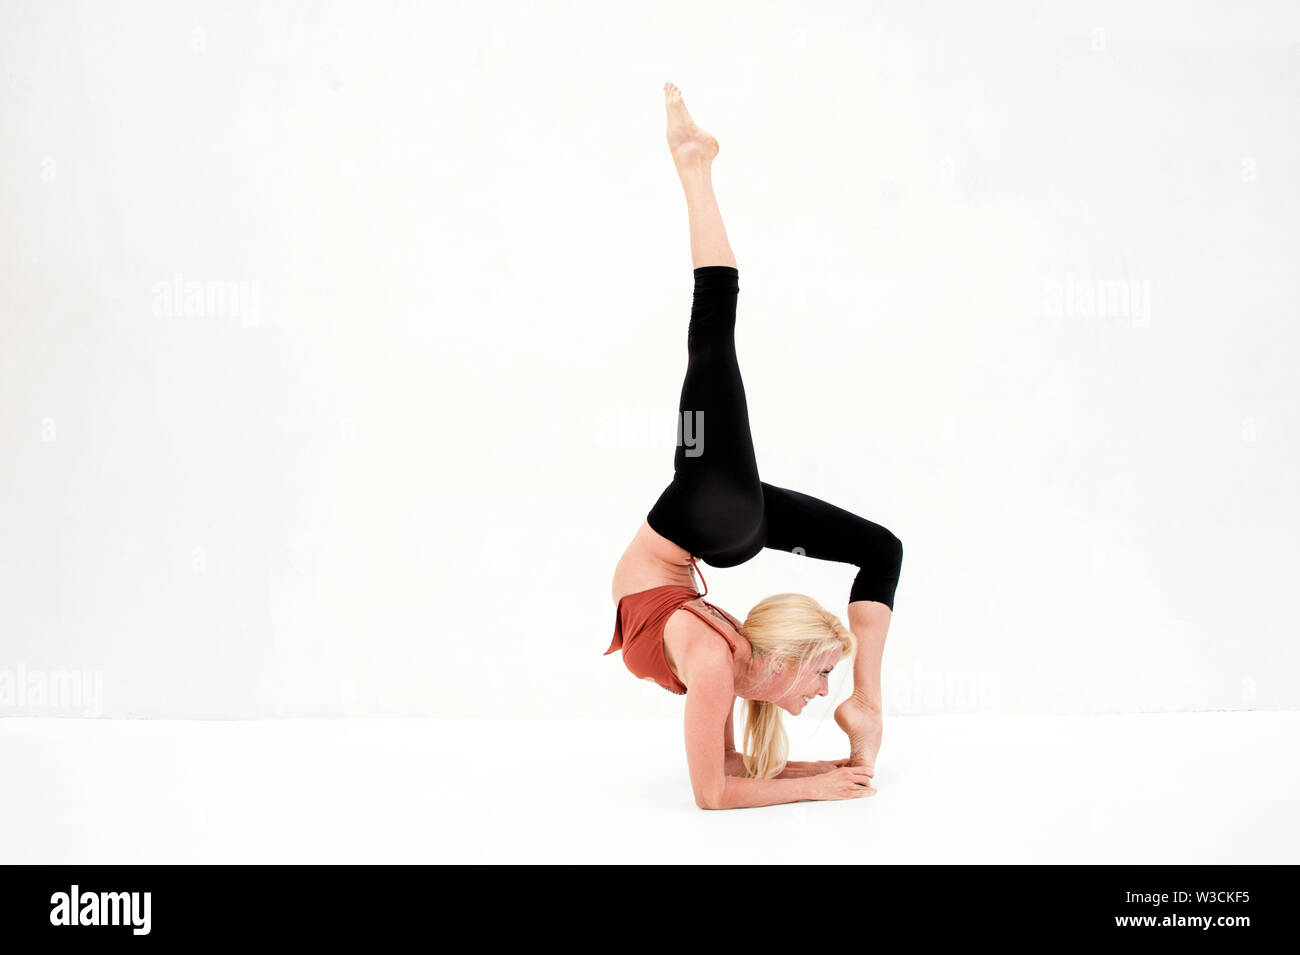 Details more than 82 extreme yoga poses for 1 latest